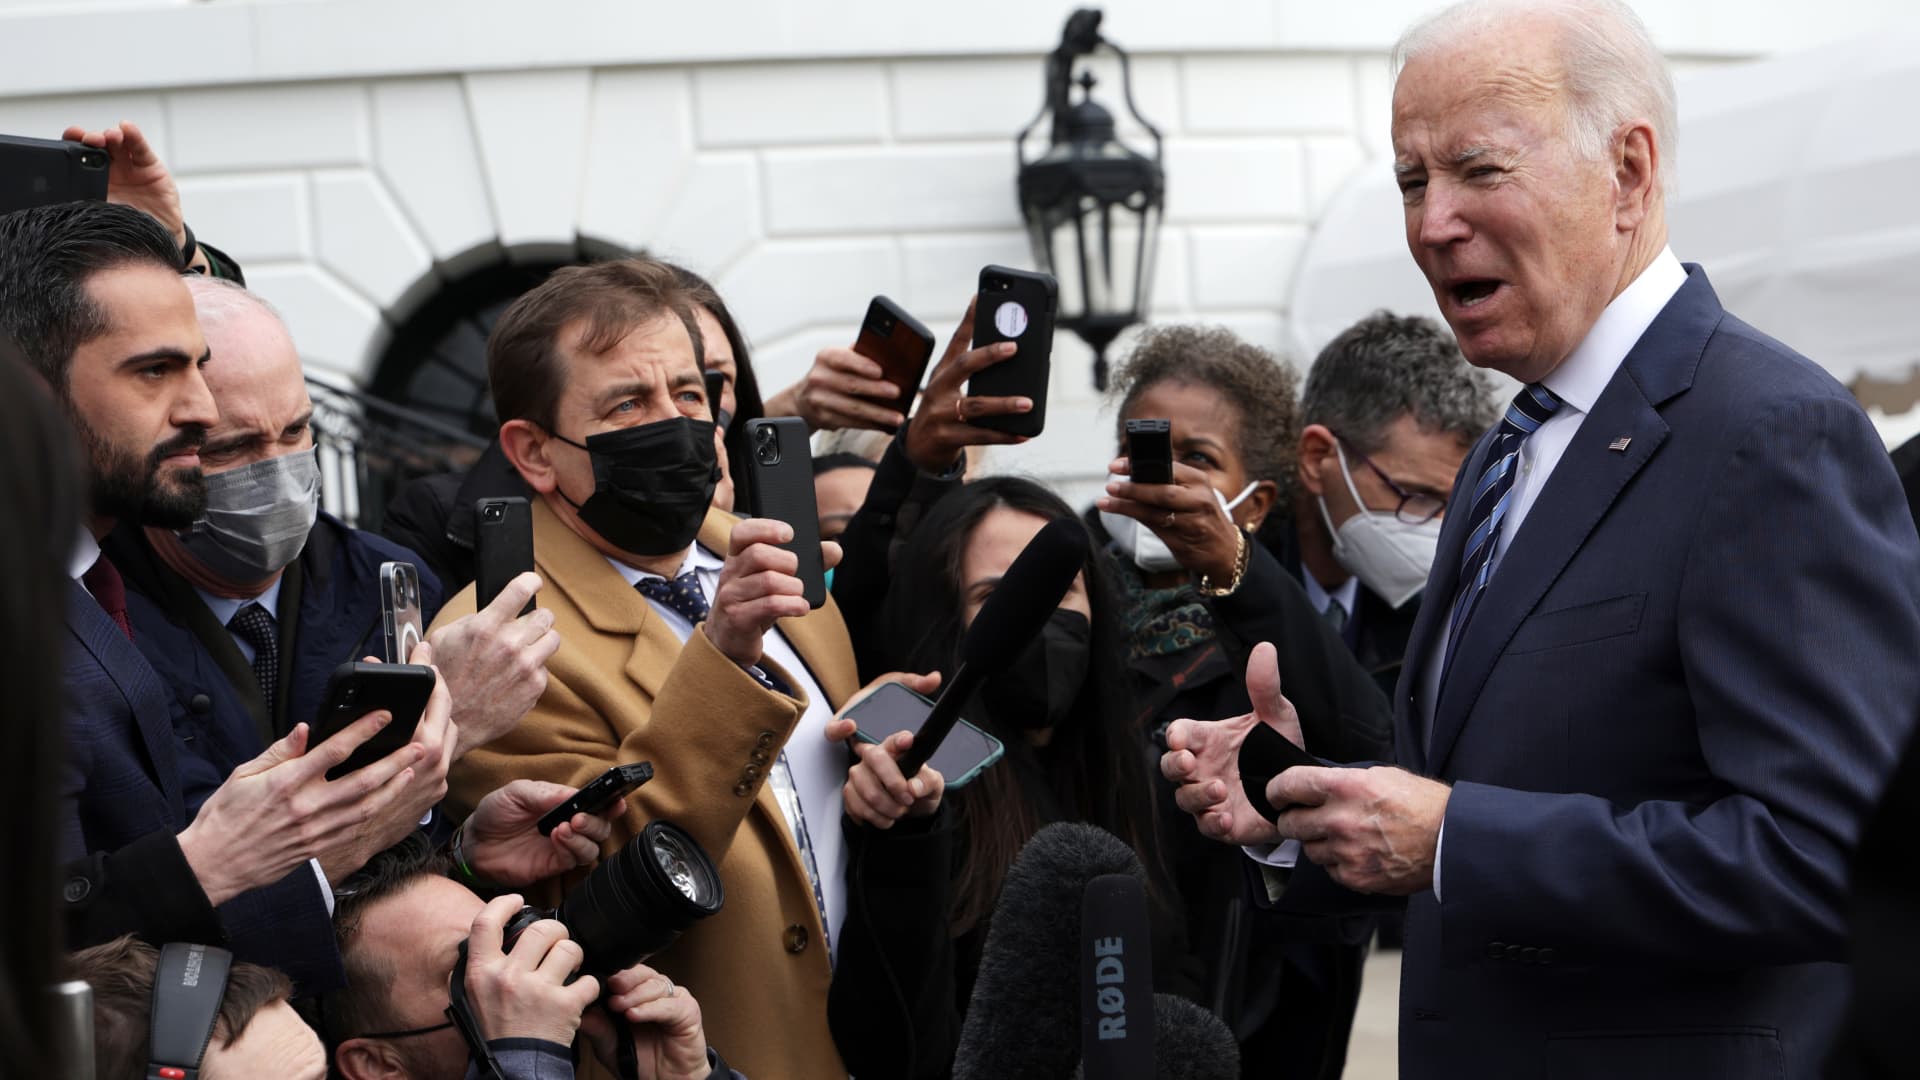 U.S. President Joe Biden speaks to members of the press prior to a departure for Cleveland, Ohio from the White House on February 17, 2022 in Washington, DC.